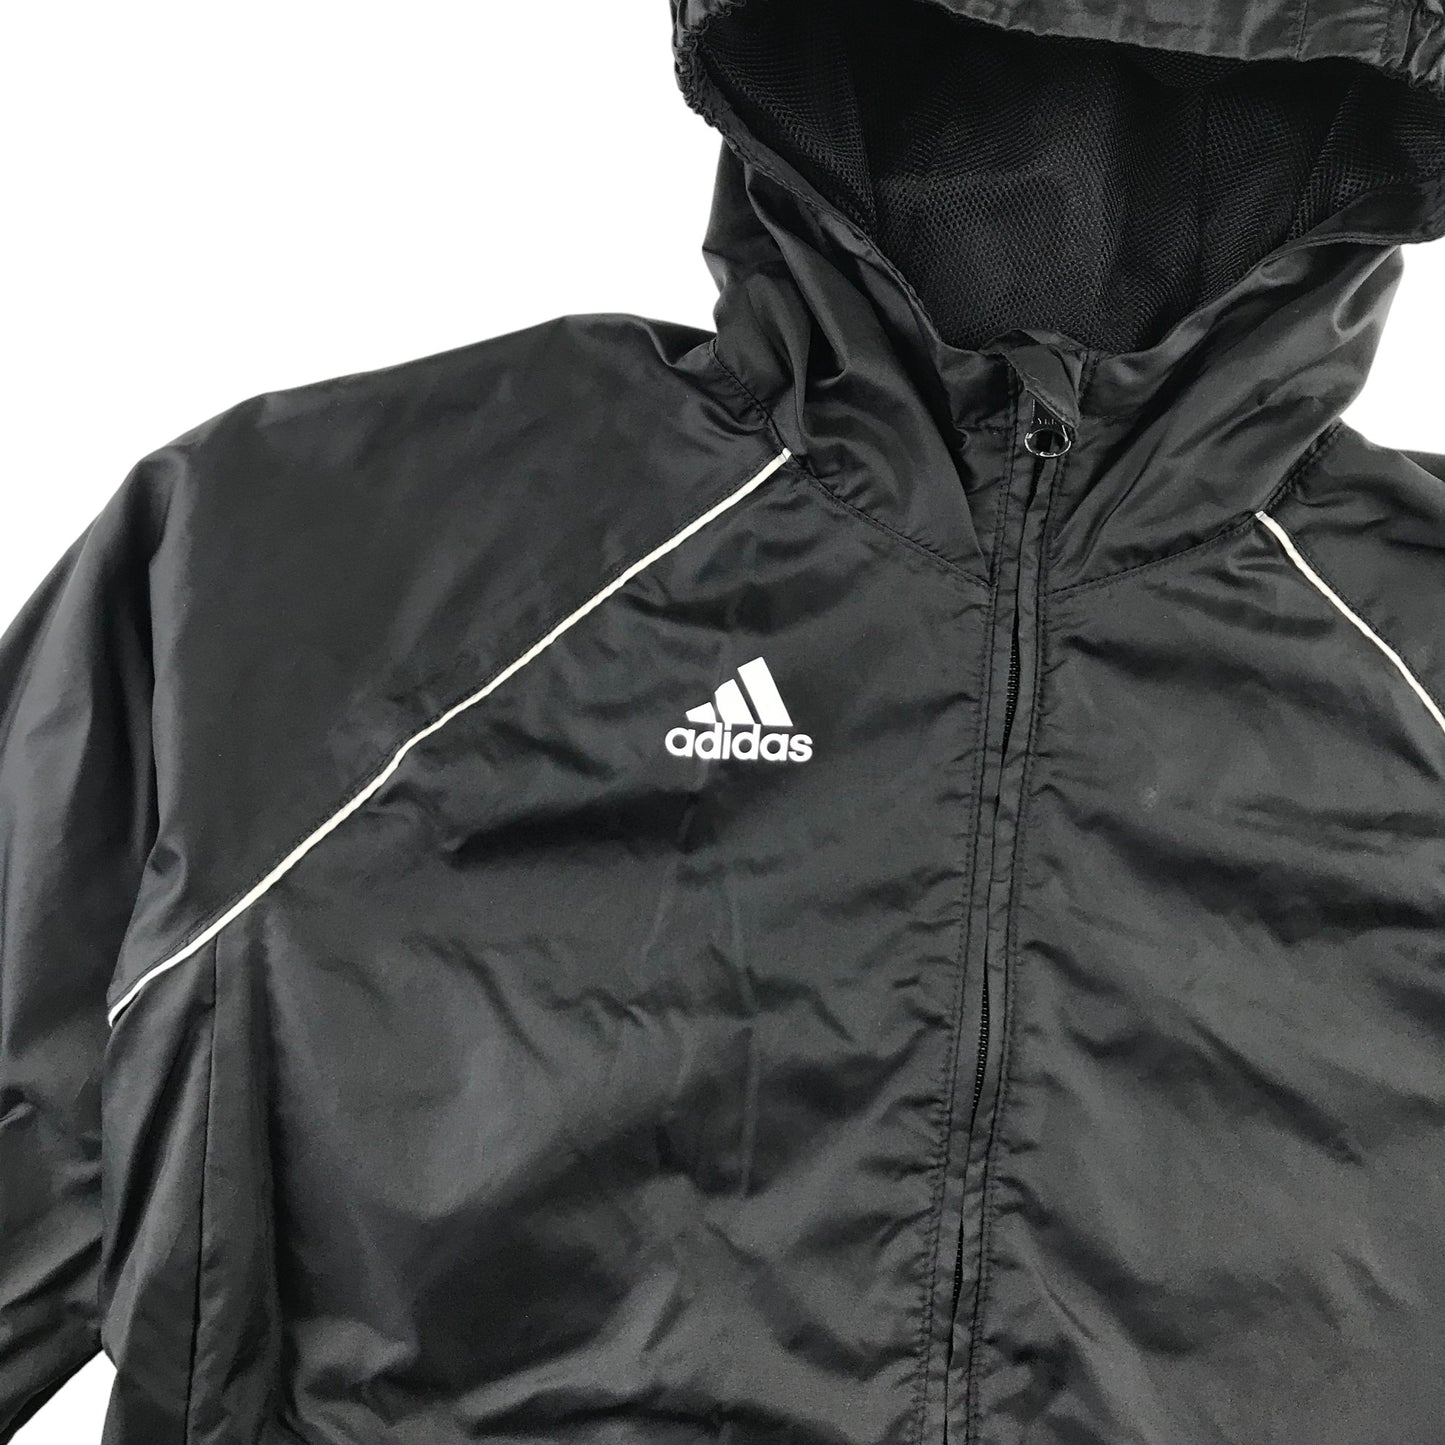 Adidas light jacket 9-10 years black with white details